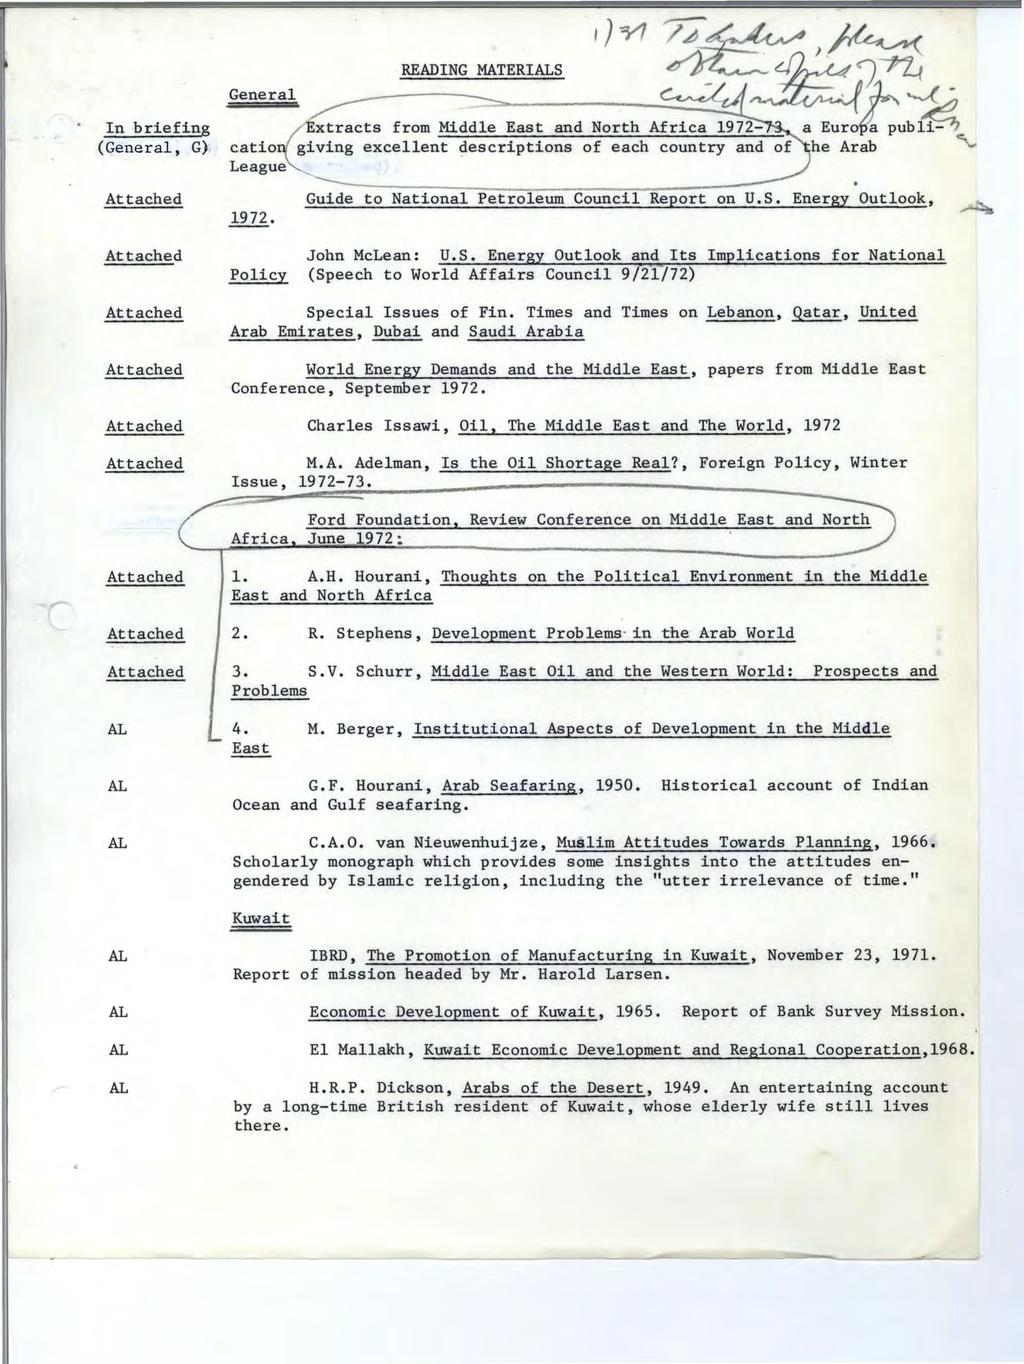 In briefing (General, G). Attached Attached Attached Attached Attached Attached General catio League 1972.